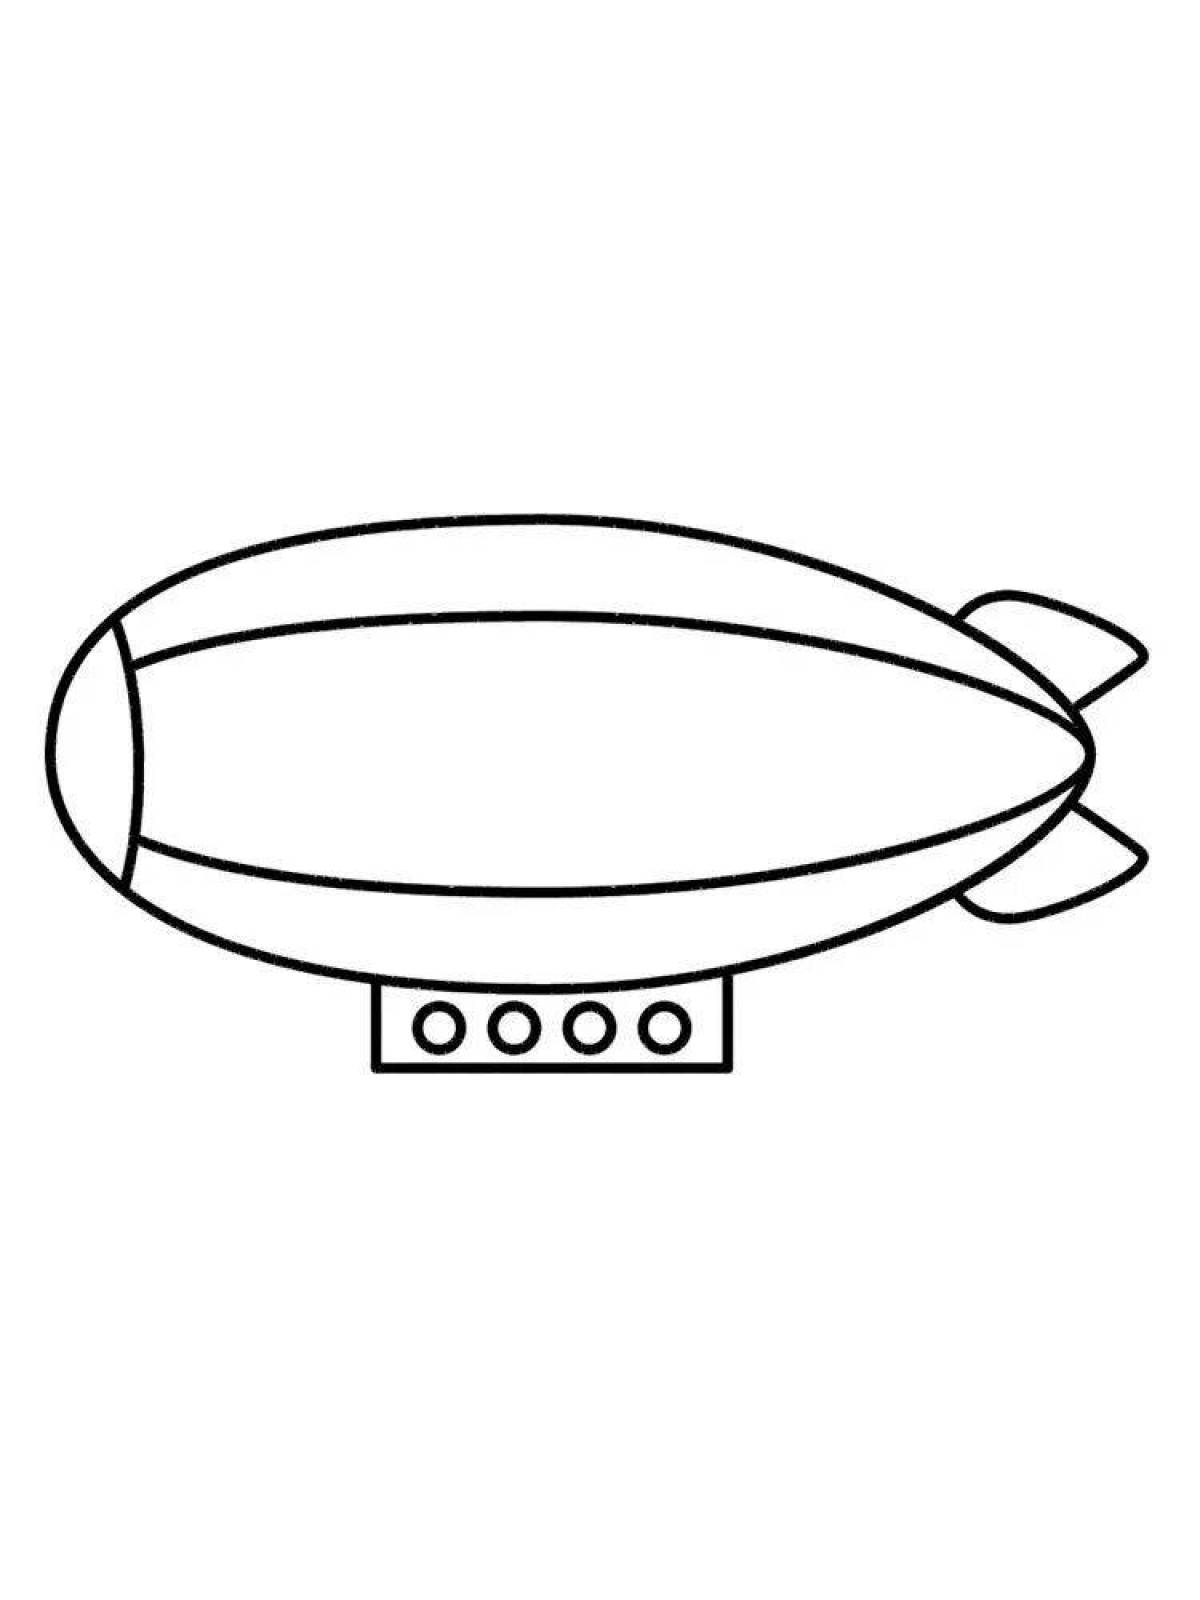 Coloring page majestic airship